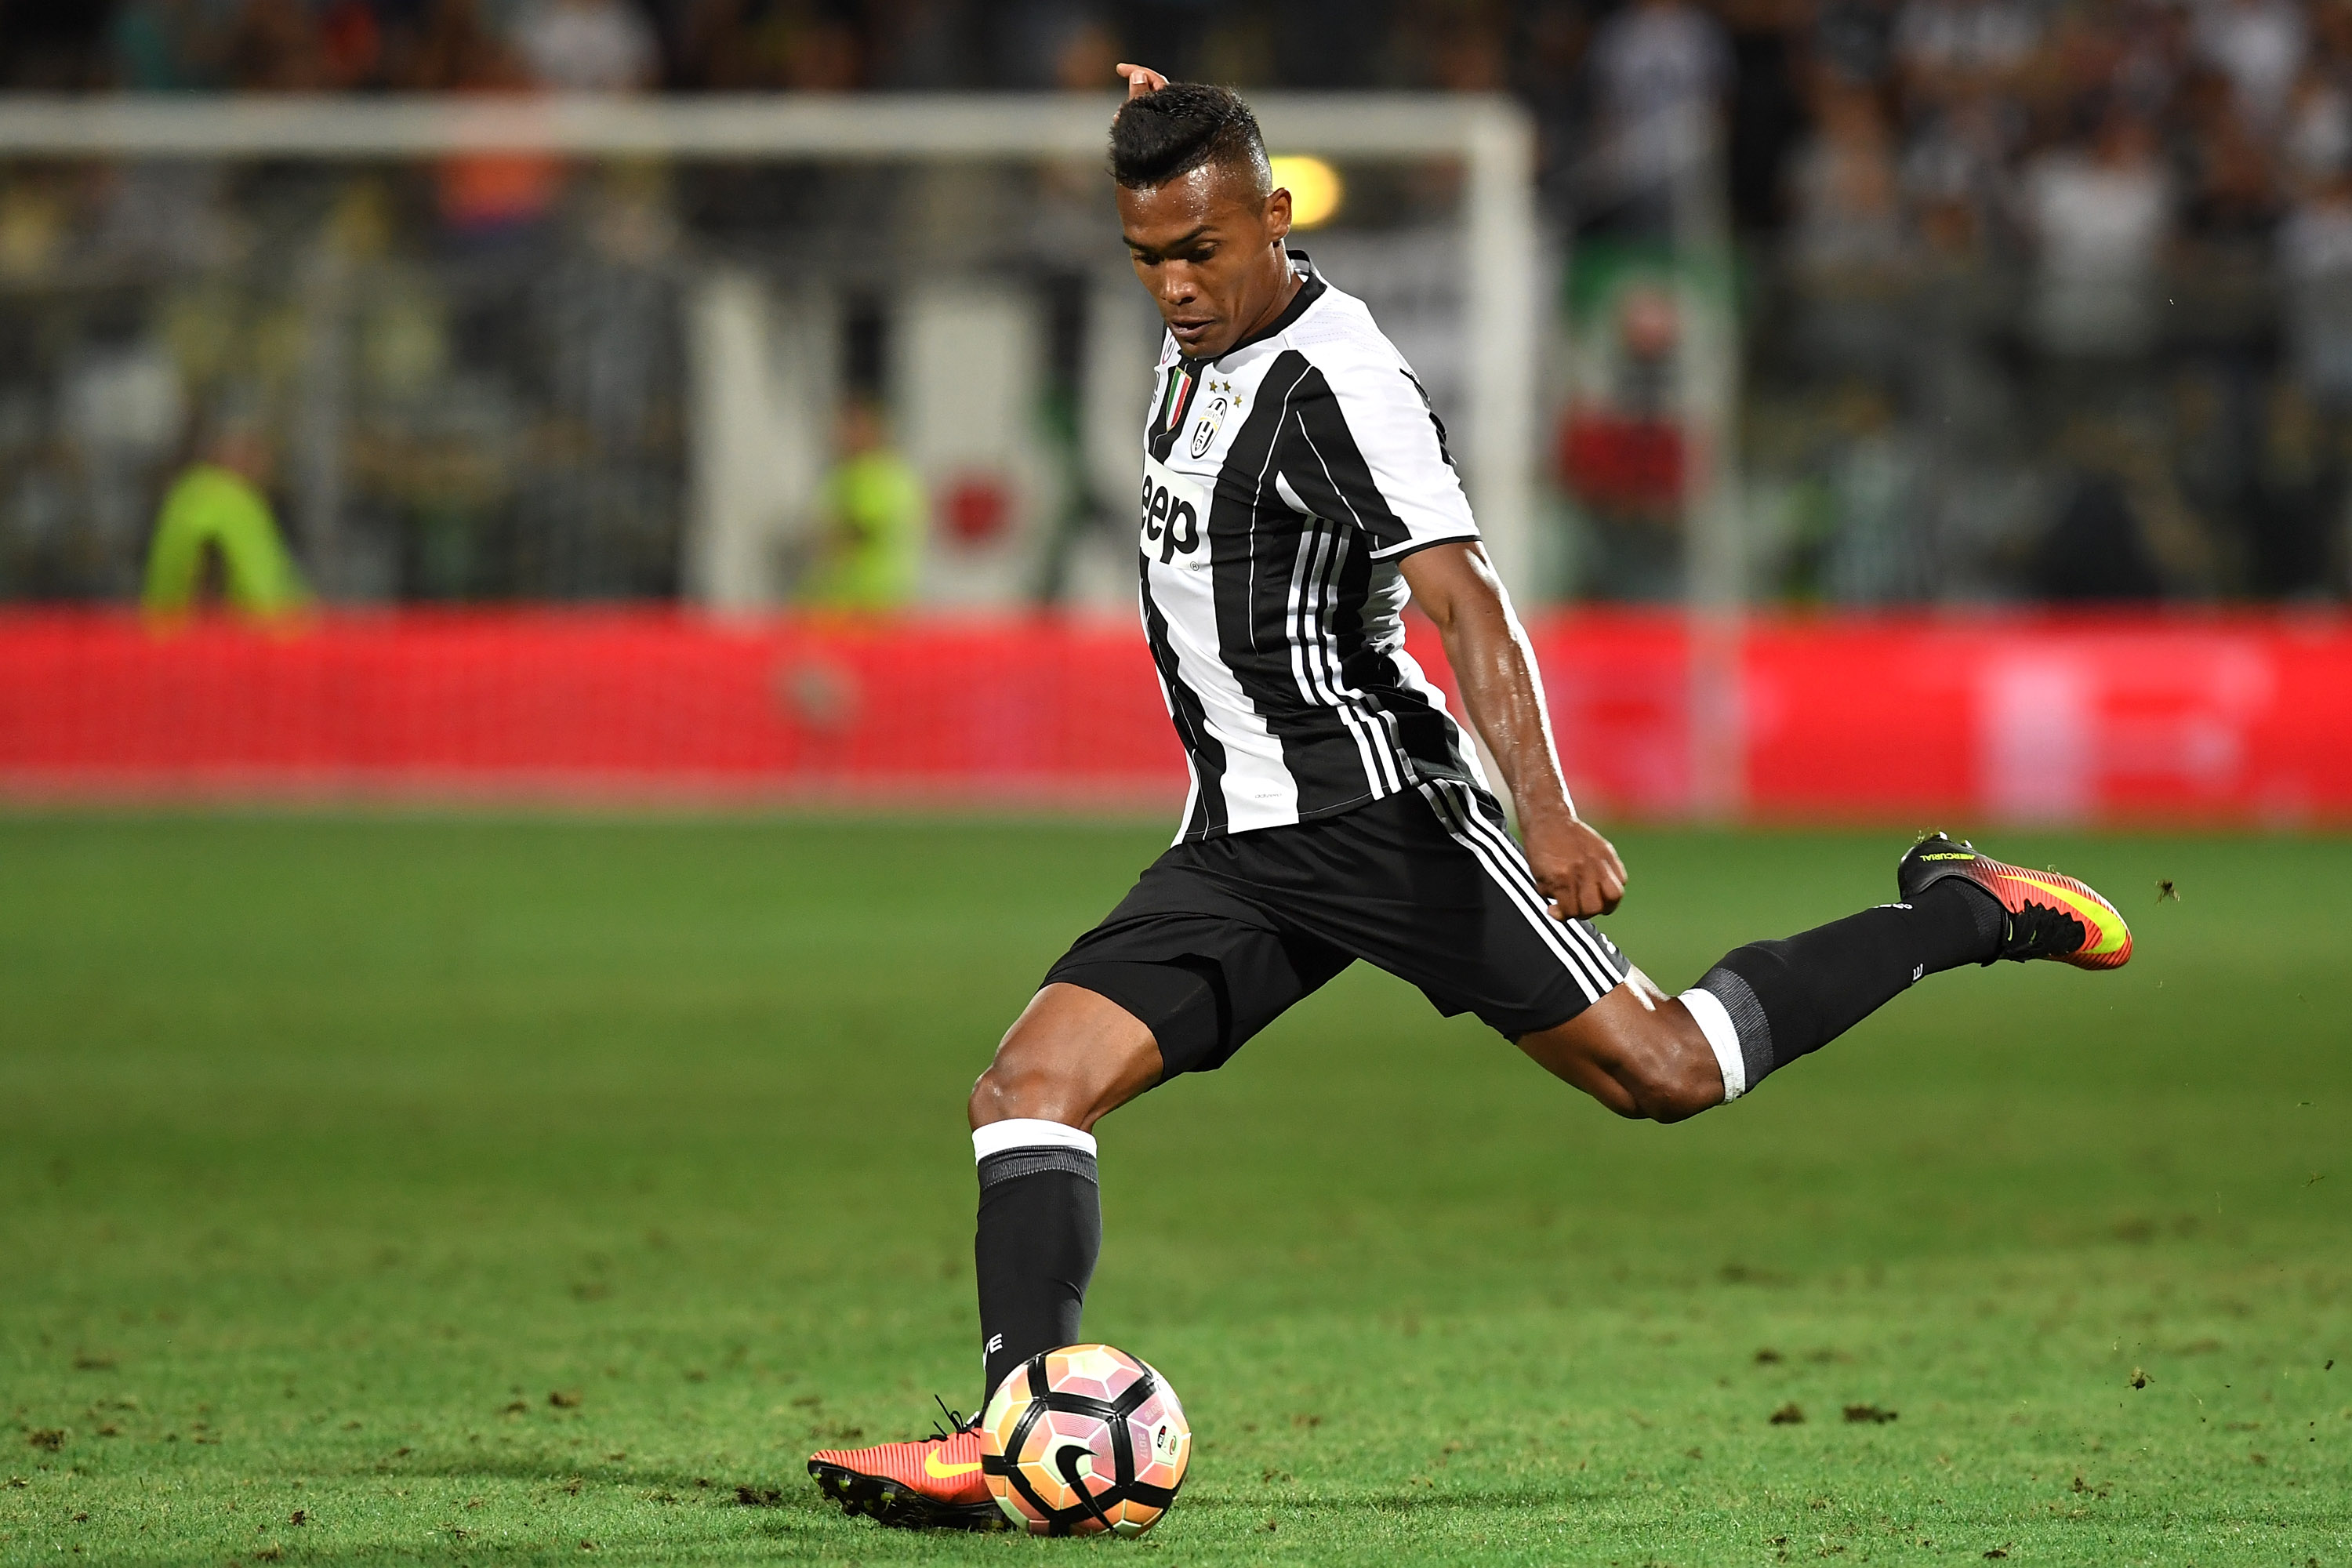 Alex Sandro: “We must win, we must be prepared for Icardi who can put it away at any time”